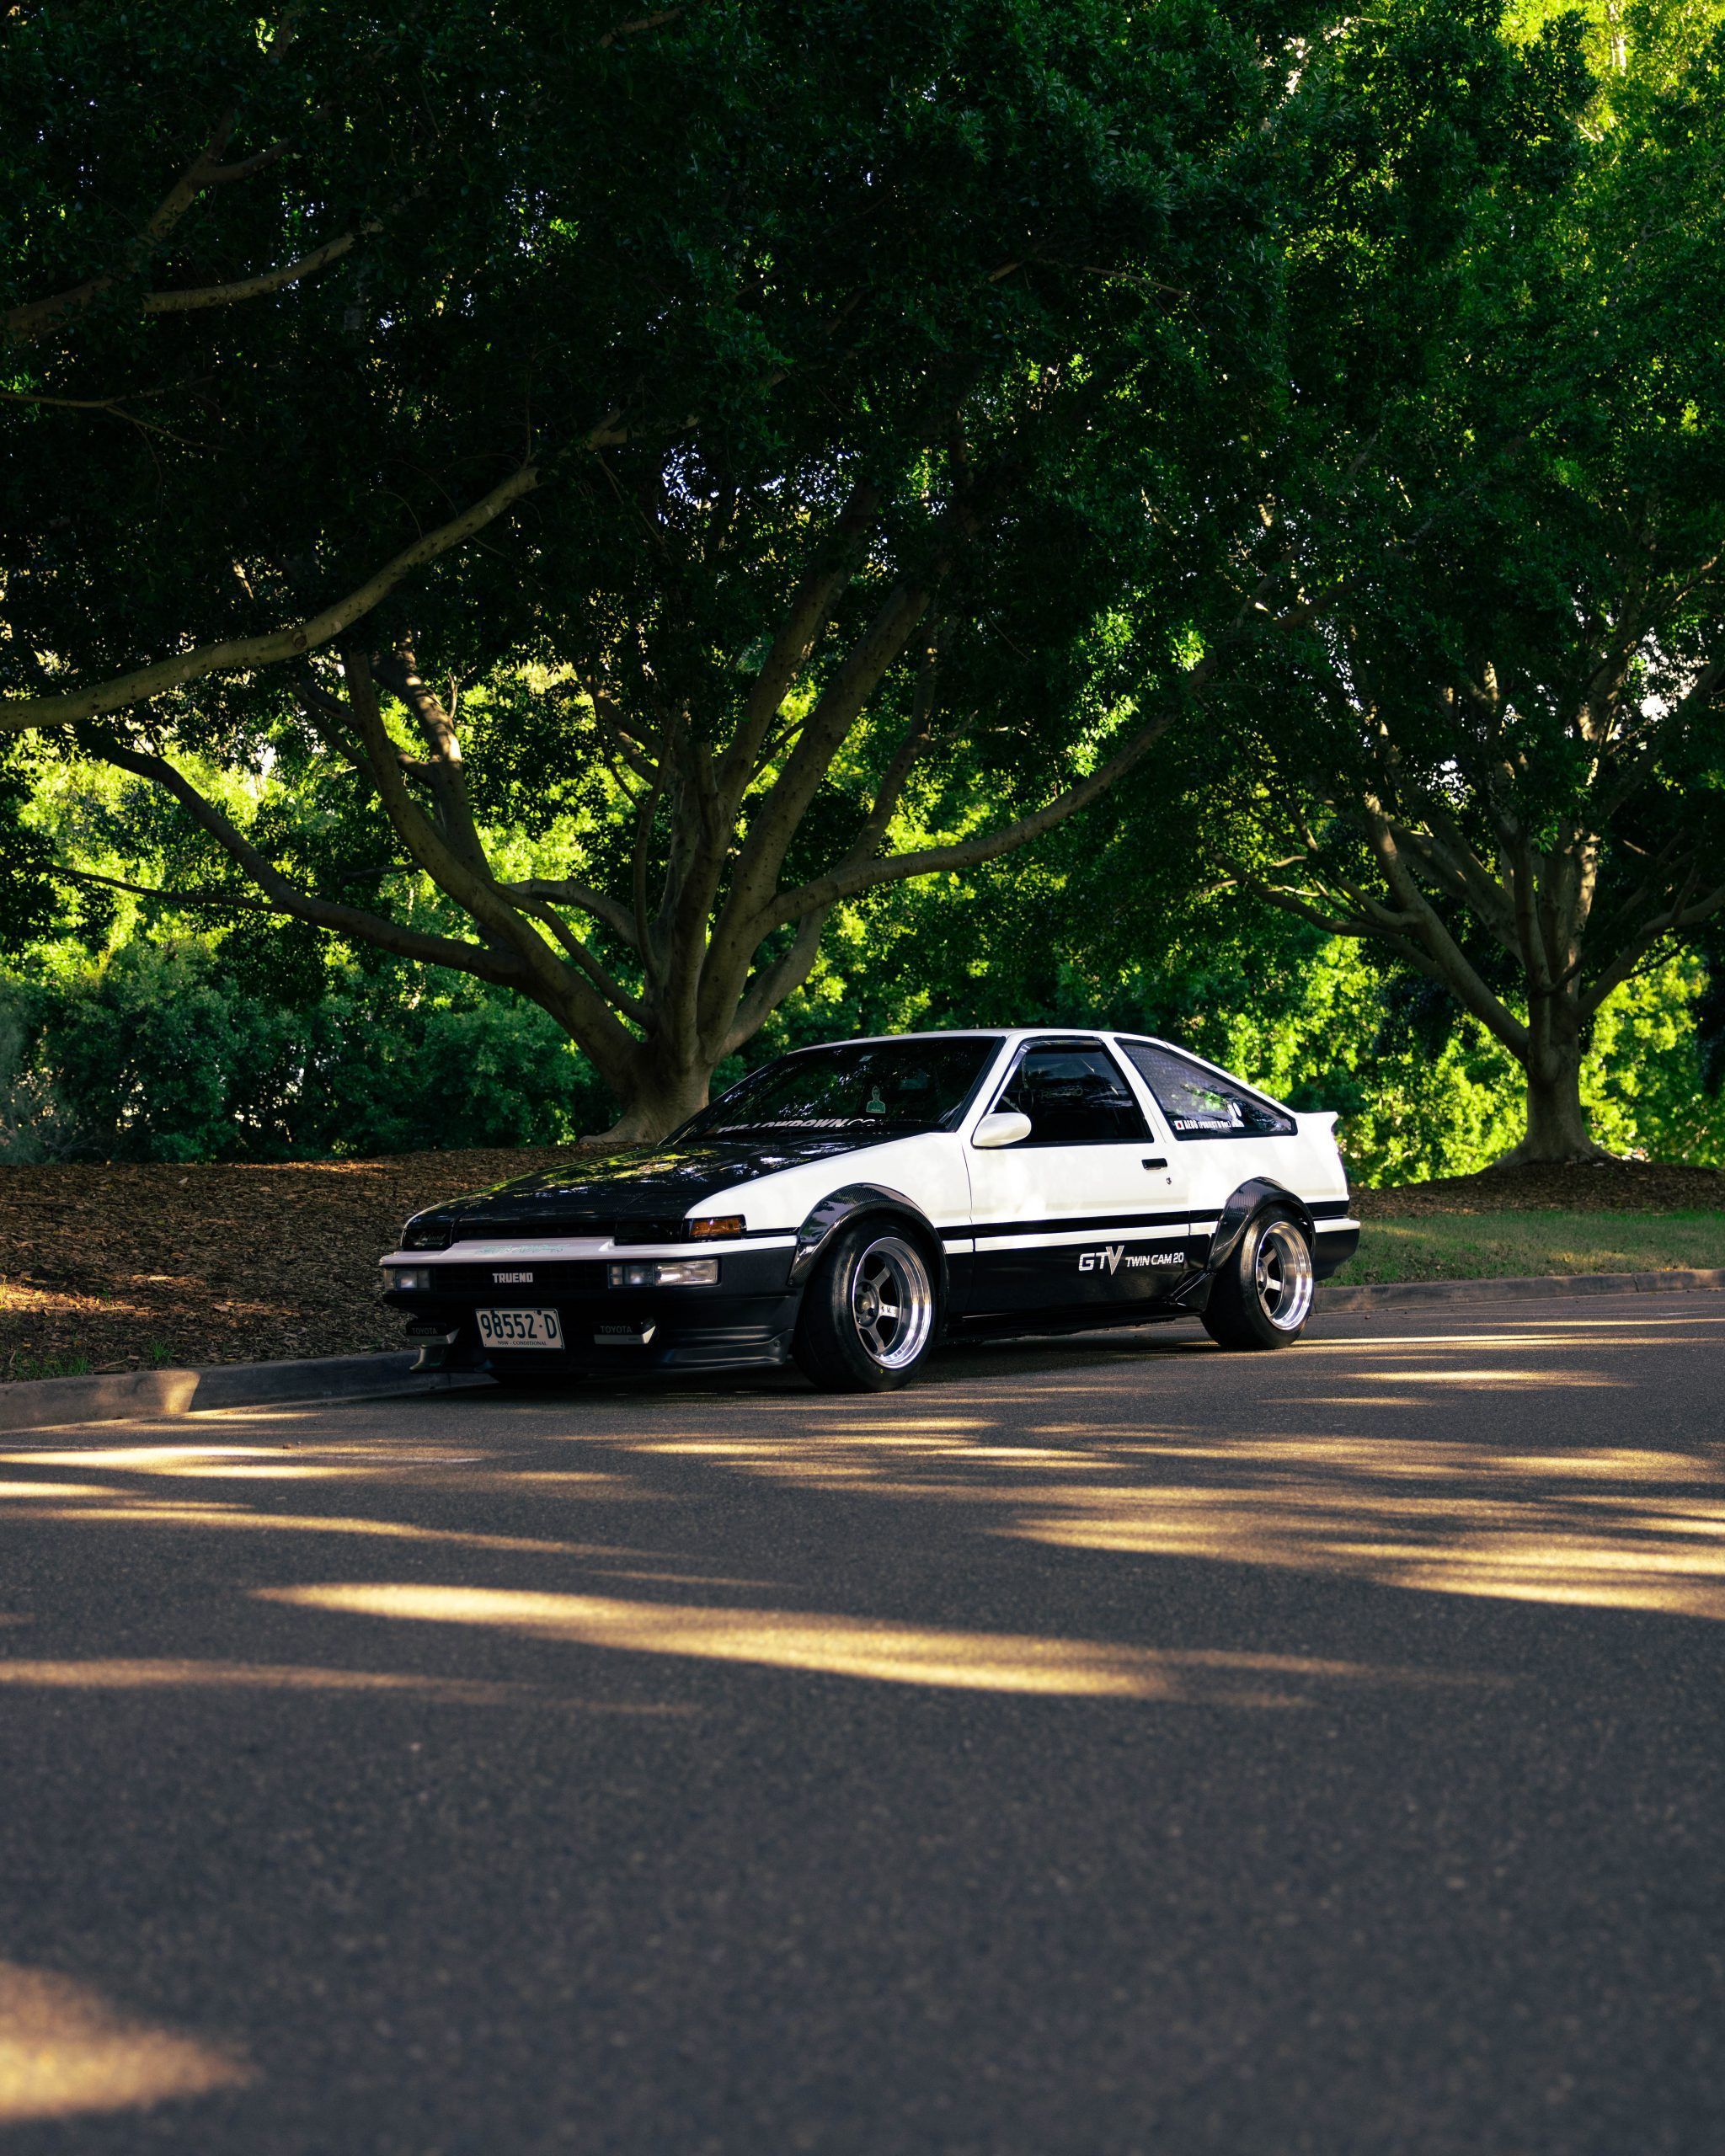 A car is parked on the side of an empty road - Toyota AE86